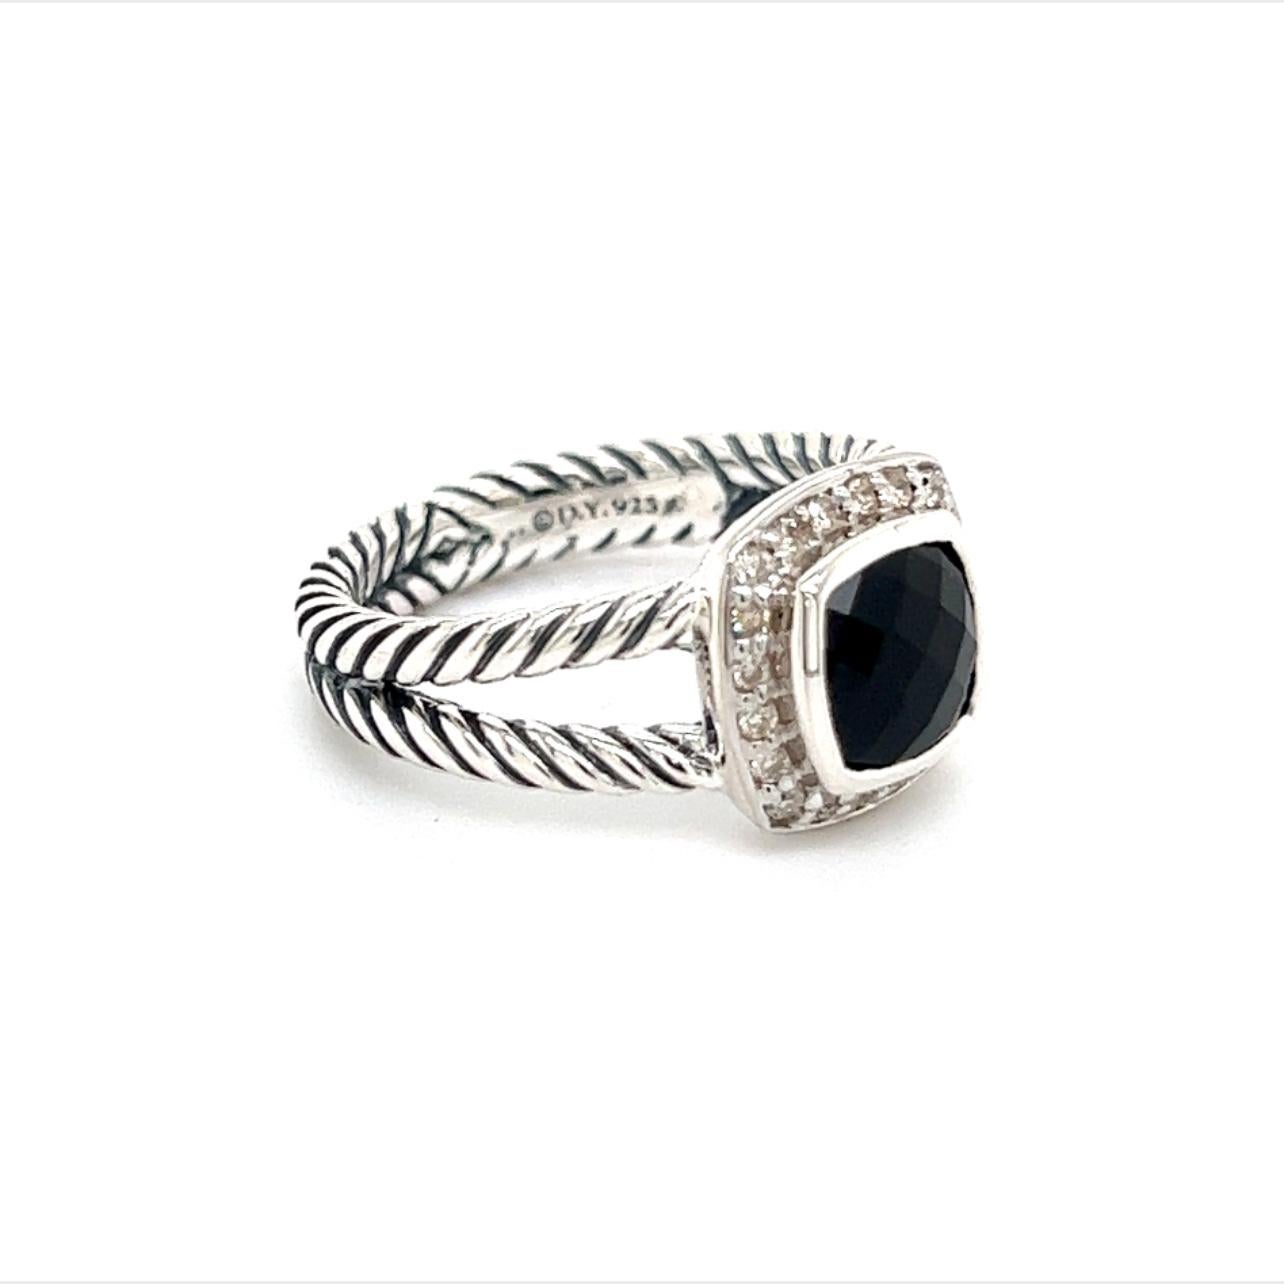 David Yurman Authentic Estate Diamond Onyx Petite Albion Ring Size 6.5 Sil 1.67 TCW 11 mm DY194

999.00$


Ring from ALBION COLLECTION

This elegant Authentic David Yurman ring is made of sterling silver and has a weight of 5.43 grams.

TRUSTED